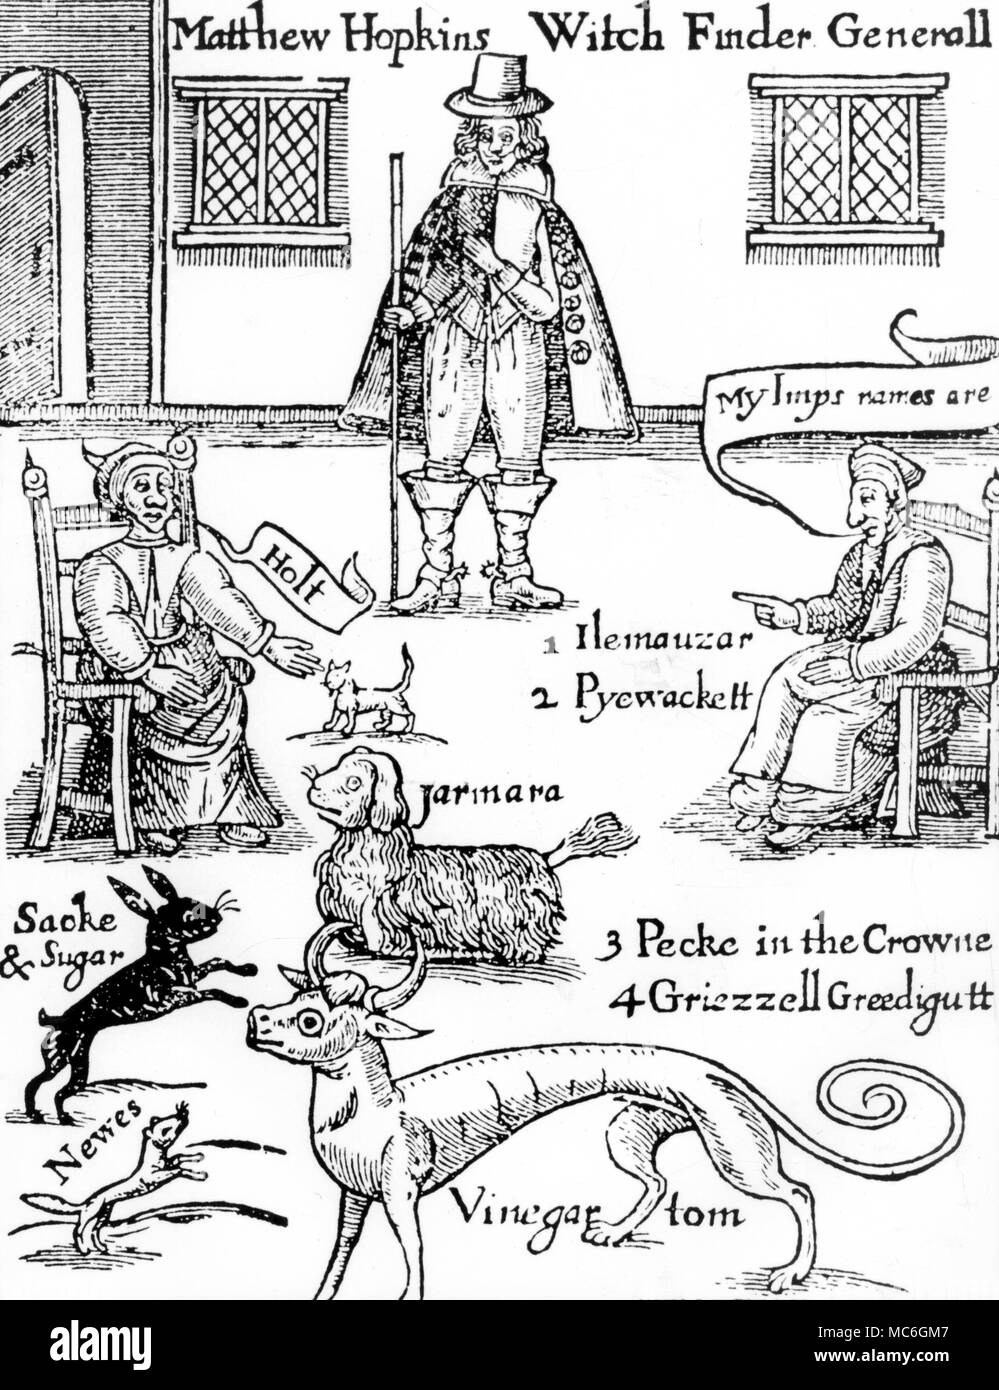 The self-proclaimed 'Witchfinder General', Matthew Hopkins with two of his female vistims. The woman to the right is Elizabeth Clark, naming her imps, or familiars, which Hopkins claimed, under oath, he had seen in her cell. Clark was hanged on this evidence. Frontispiece to Hopkin's Discovery of Witches, 1647. Stock Photo